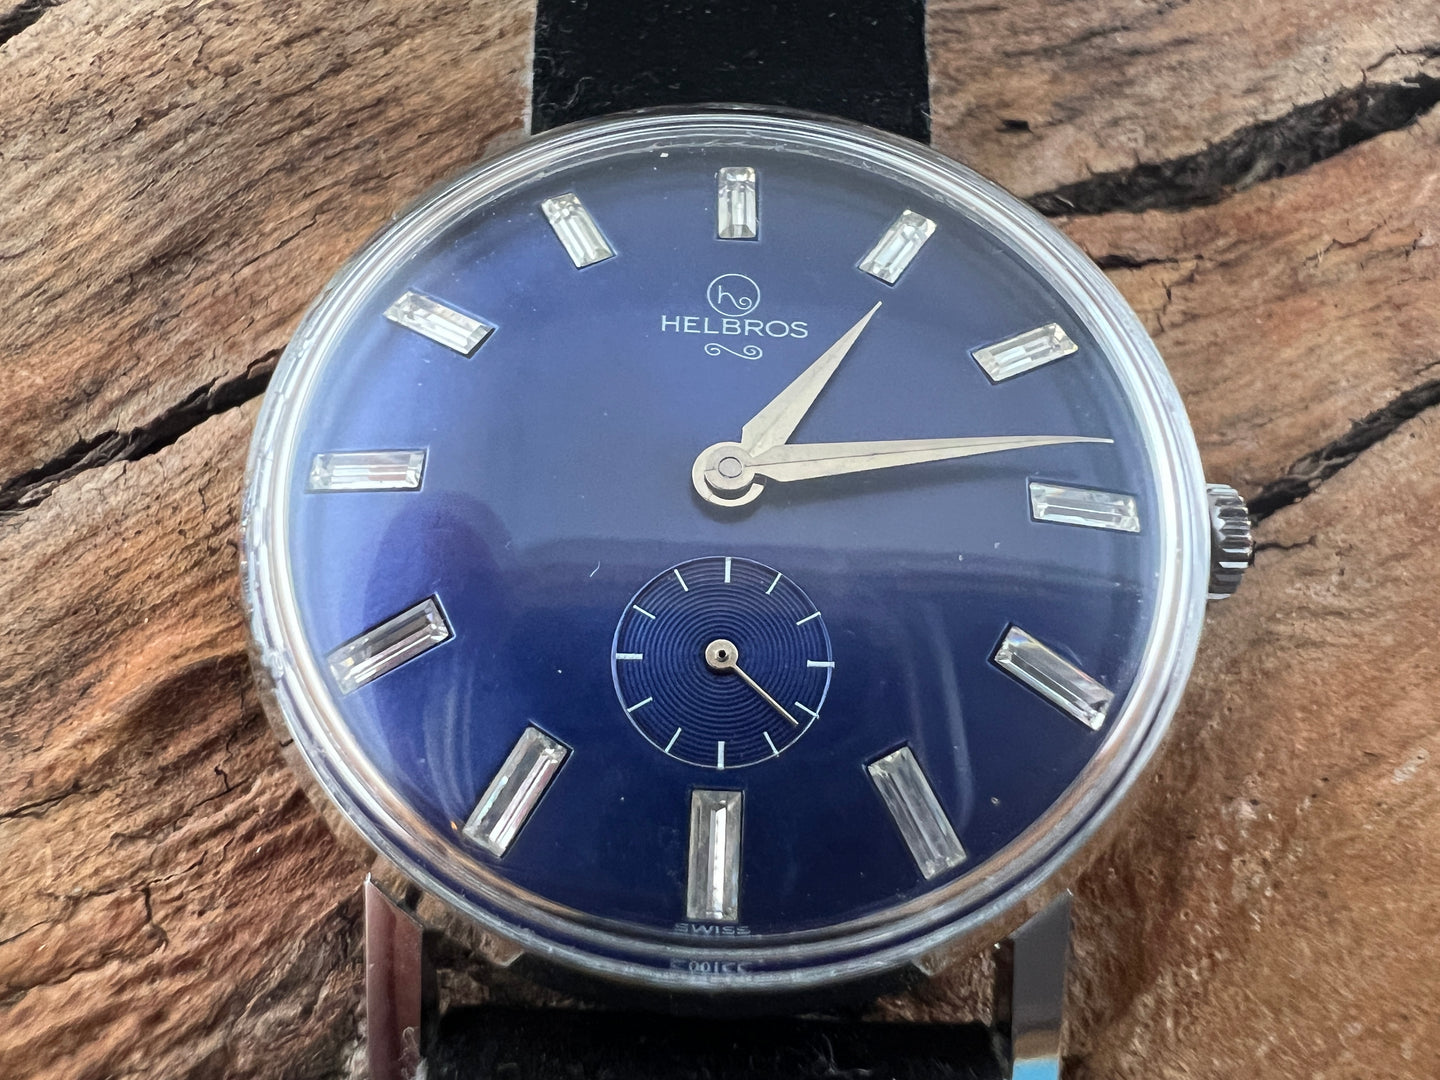 Helbros Stunning Blue Dial with Raised Reflective Crystal Hour Markers, Manual, 34mm